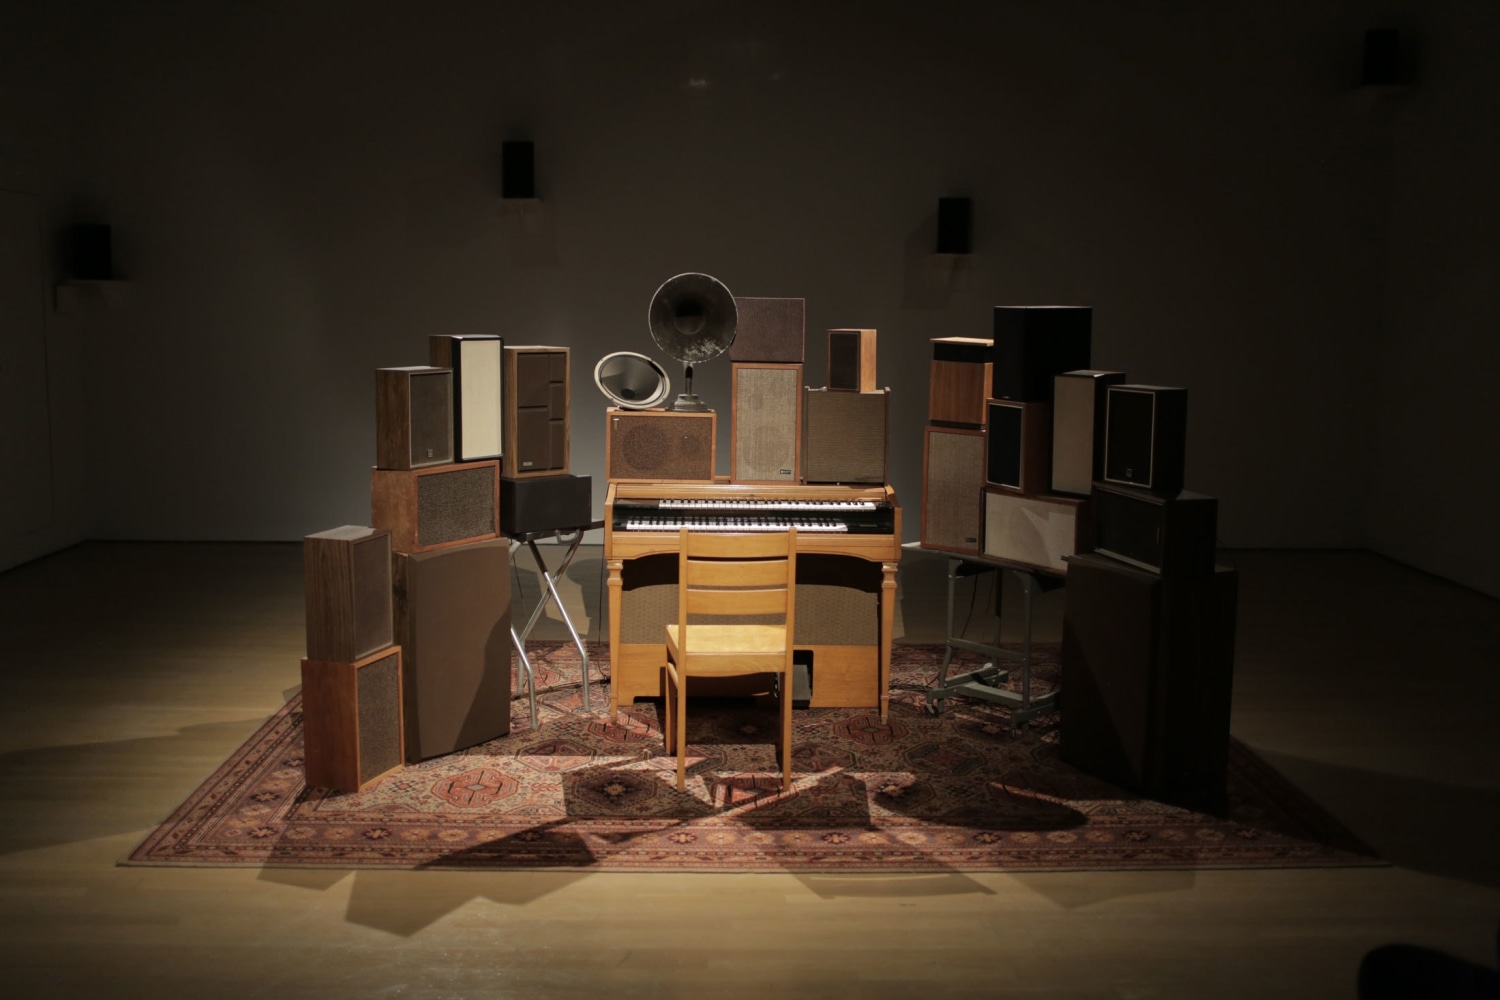 Janet Cardiff and George Bures Miller
The Poetry Machine,&amp;nbsp;2017
Interactive audio/mixed-media installation including organ, speakers, carpet, computer and electronics
Dimensions variable
Installation view,&amp;nbsp;Leonard Cohen: A Crack in Everything
November 9, 2017 &amp;ndash;&amp;nbsp;April 12,&amp;nbsp;2018
Mus&amp;eacute;e d&amp;#39;art contemporain de Montr&amp;eacute;al, Canada